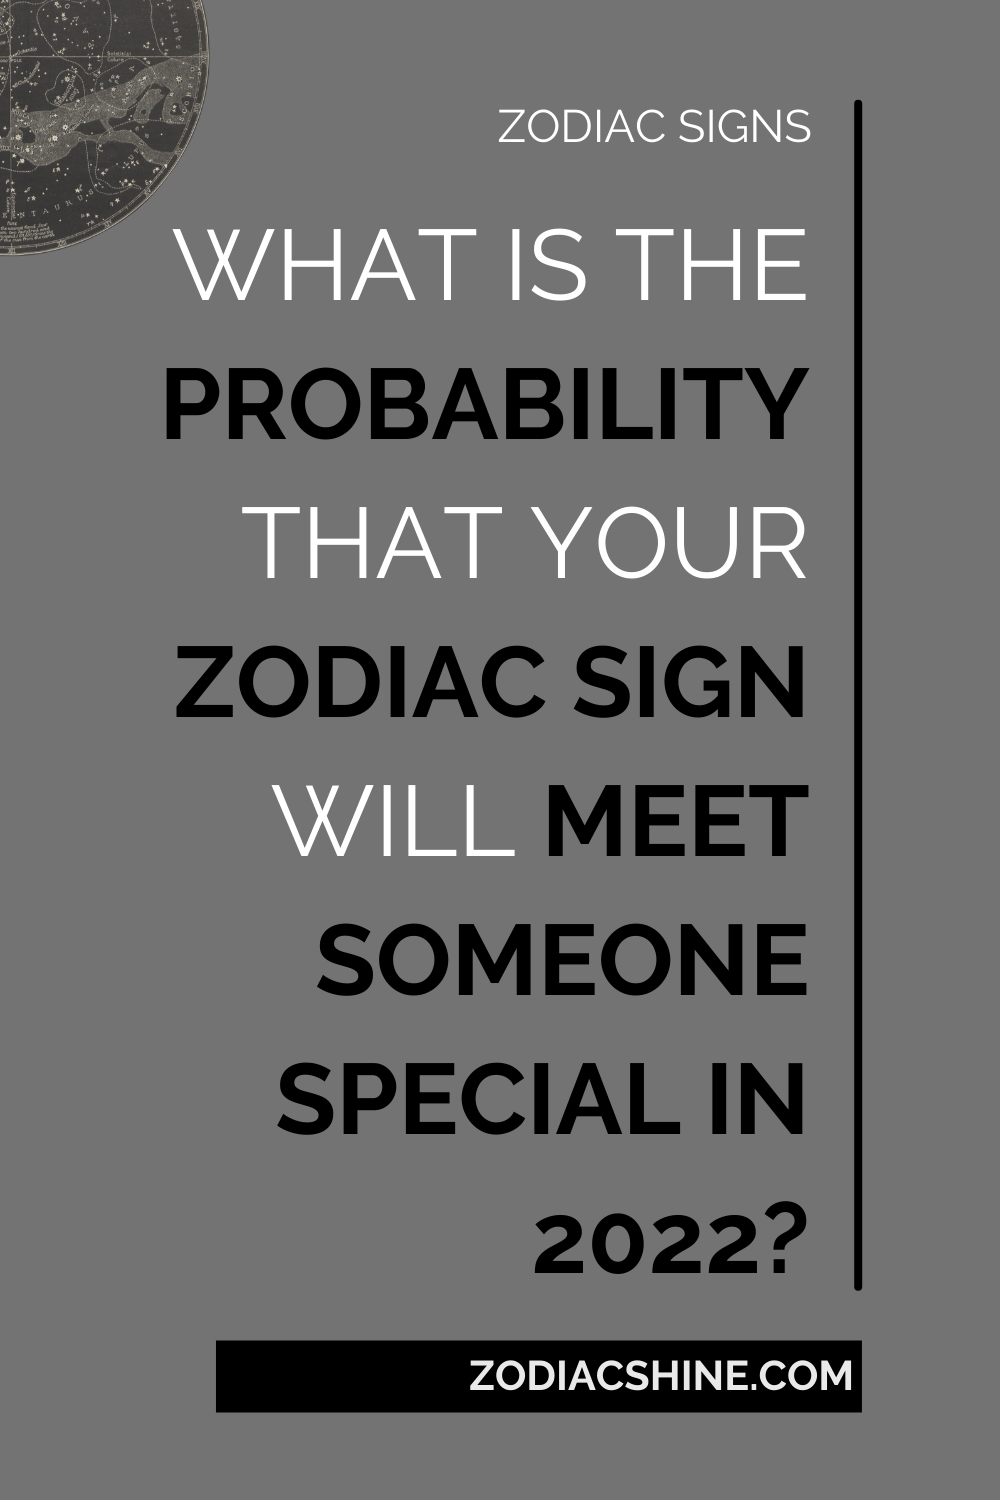 What Is The Probability That Your Zodiac Sign Will Meet Someone Special In 2022?